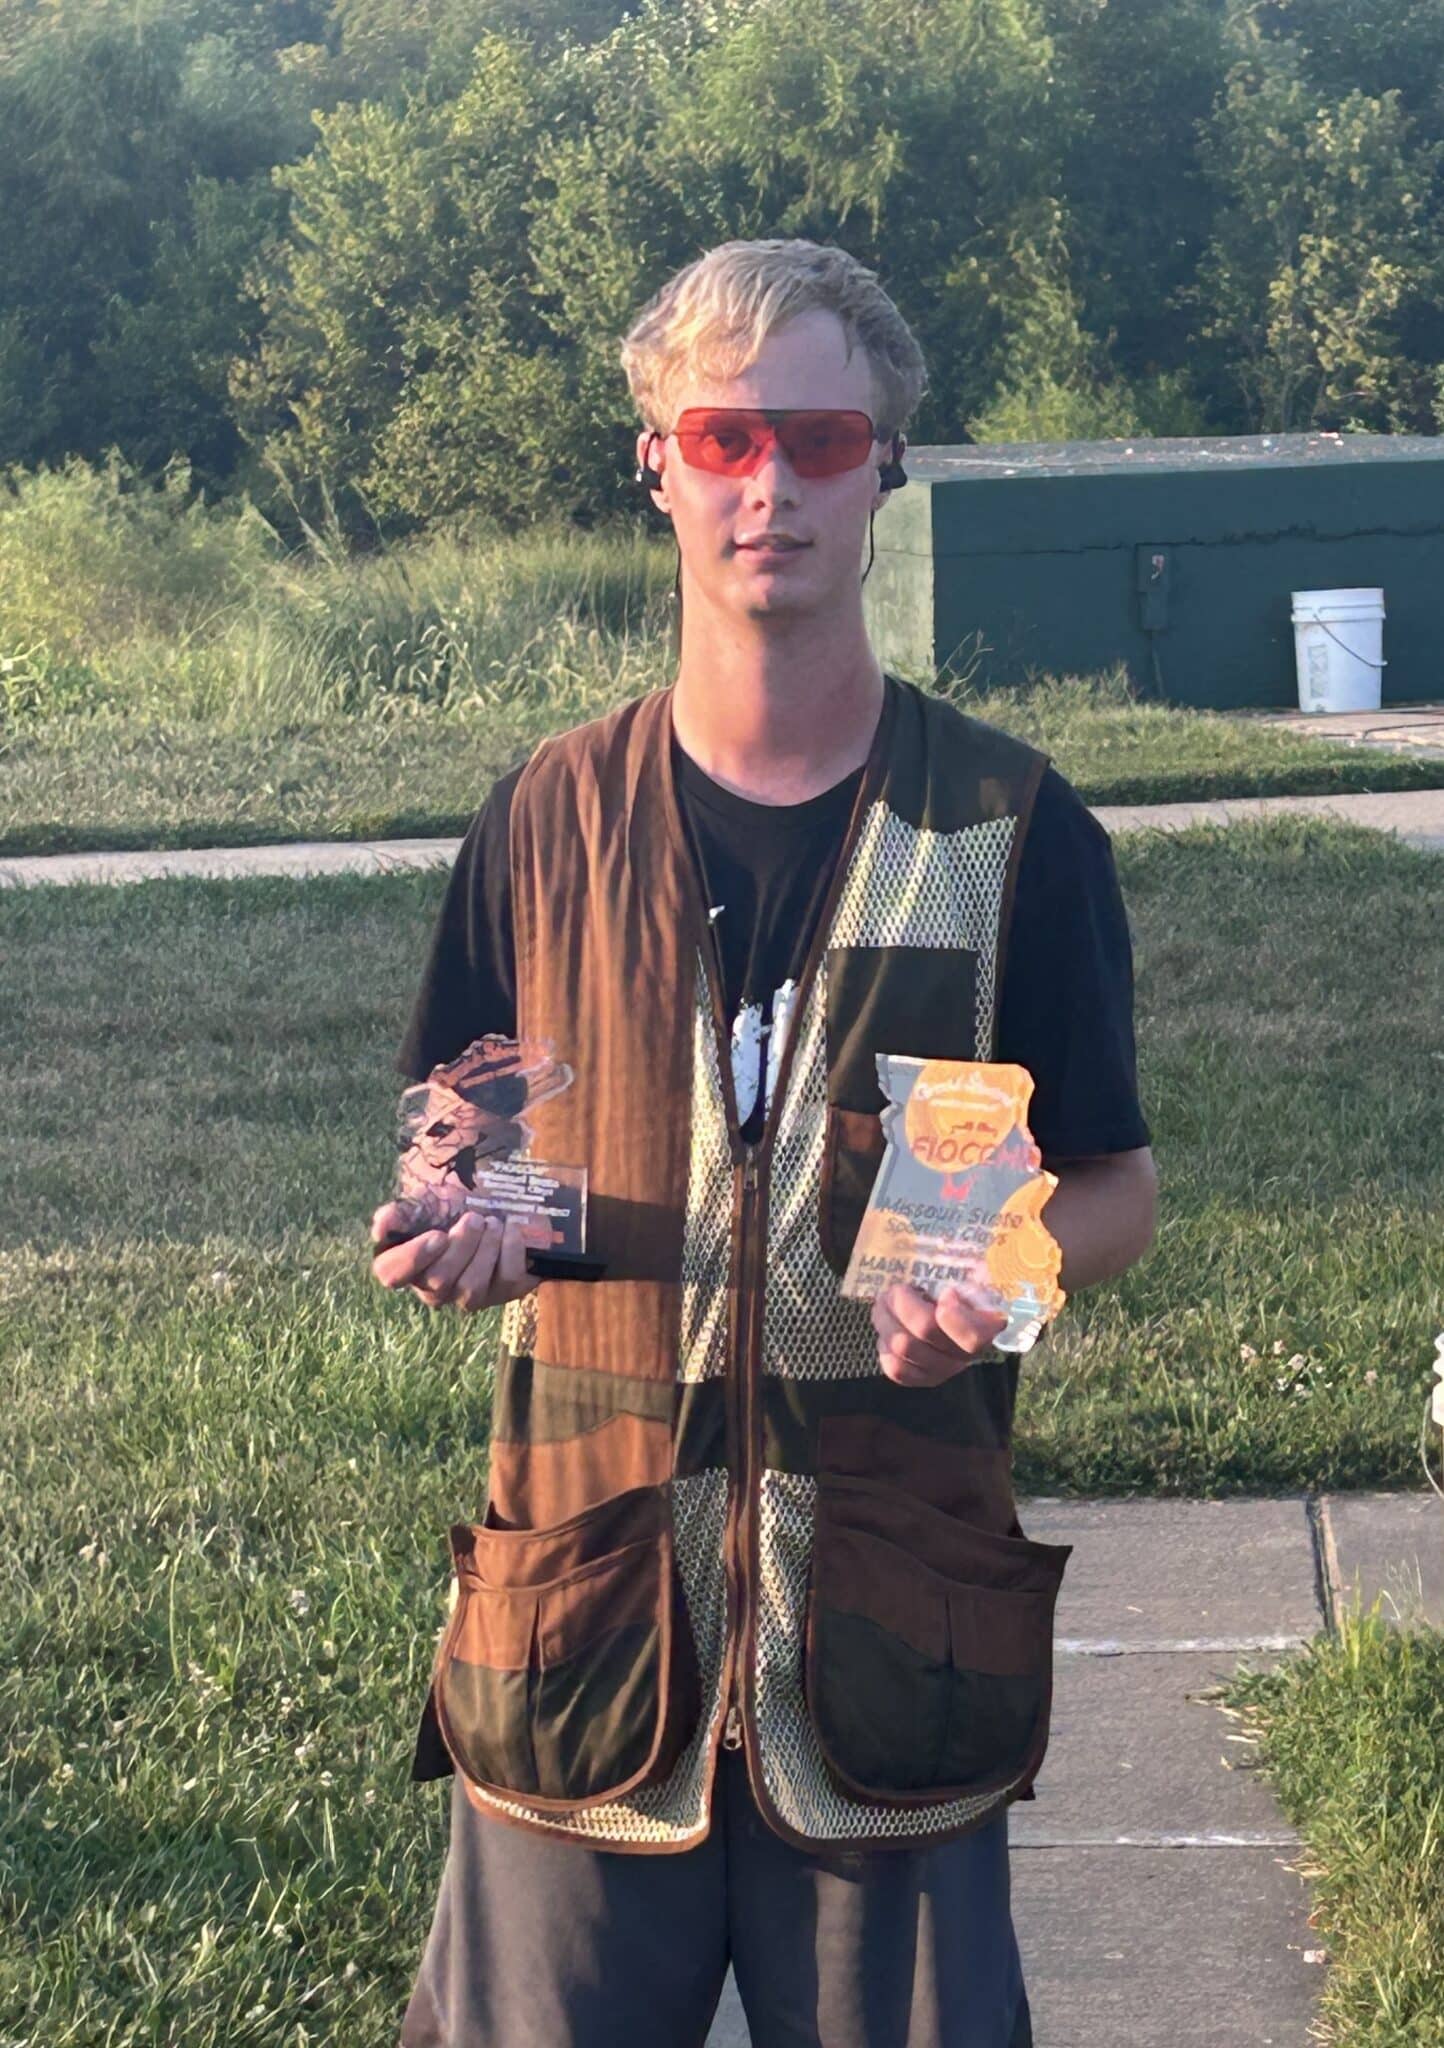 SCA junior Sean McCarty finished second in Class E as the fourth youngest participant in Missouri State Sporting Clays Championship.